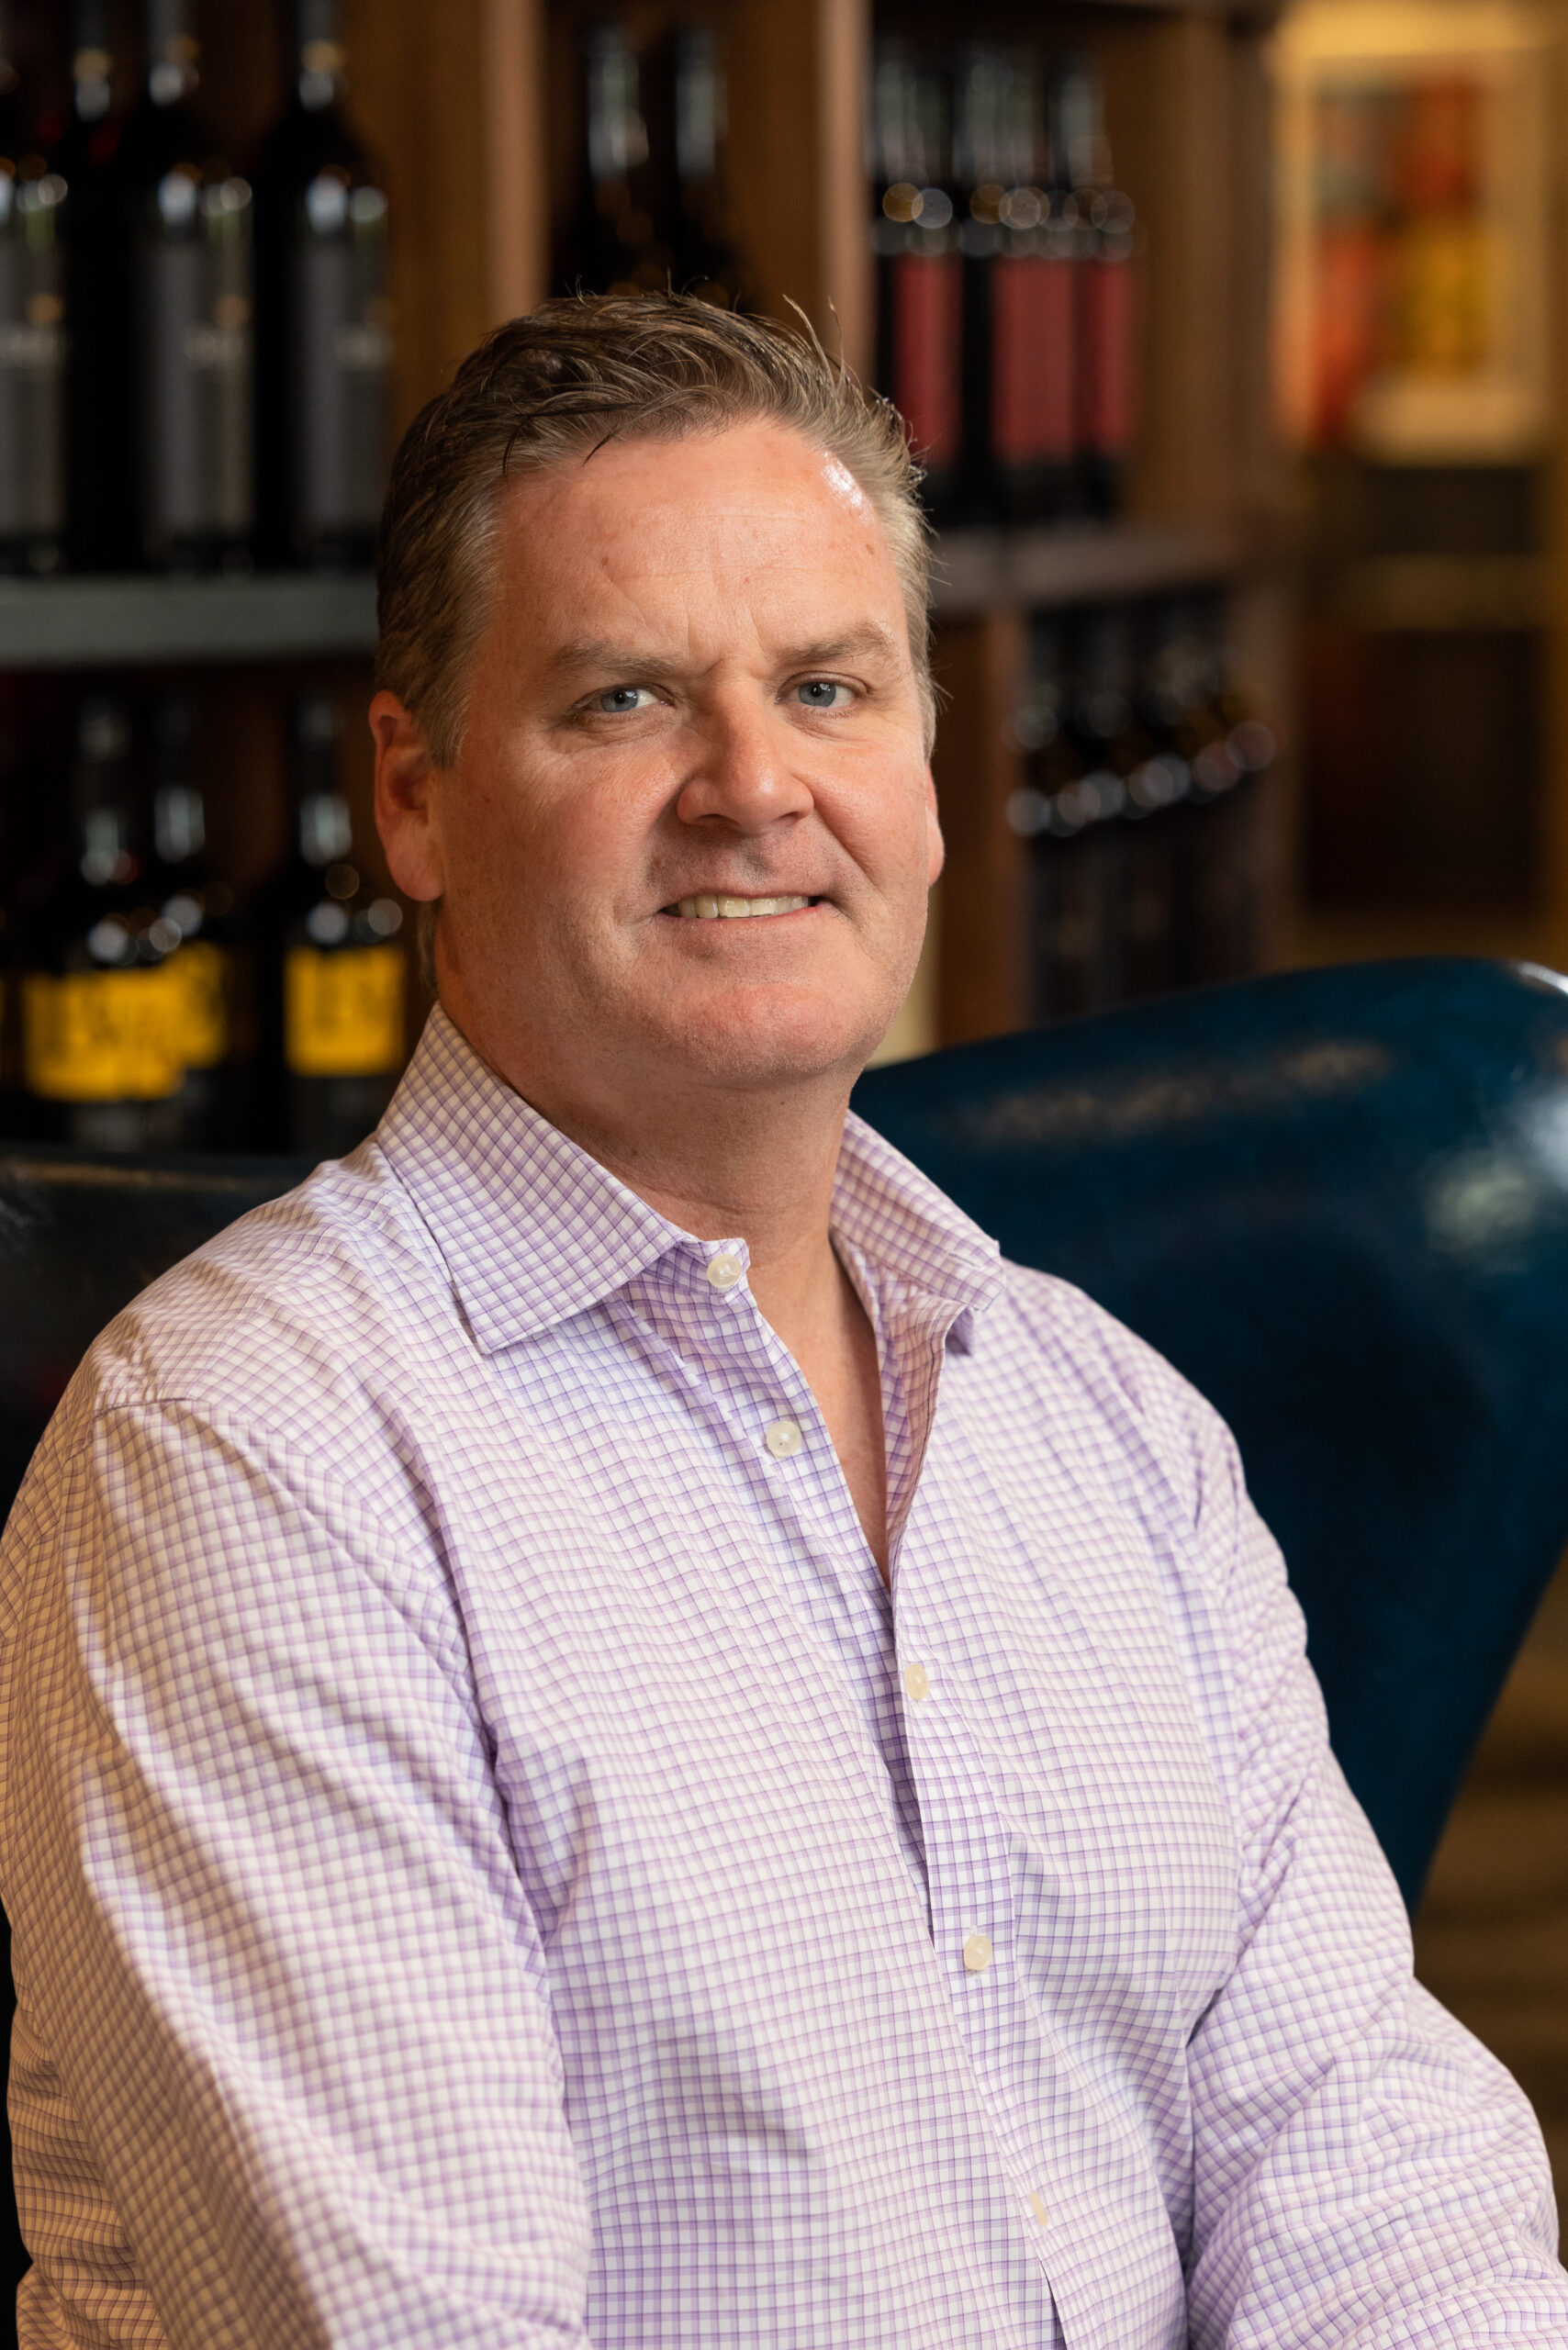 John Anthony Family of Wines Announces Promotion of Art Pinn to Vice President of Sales